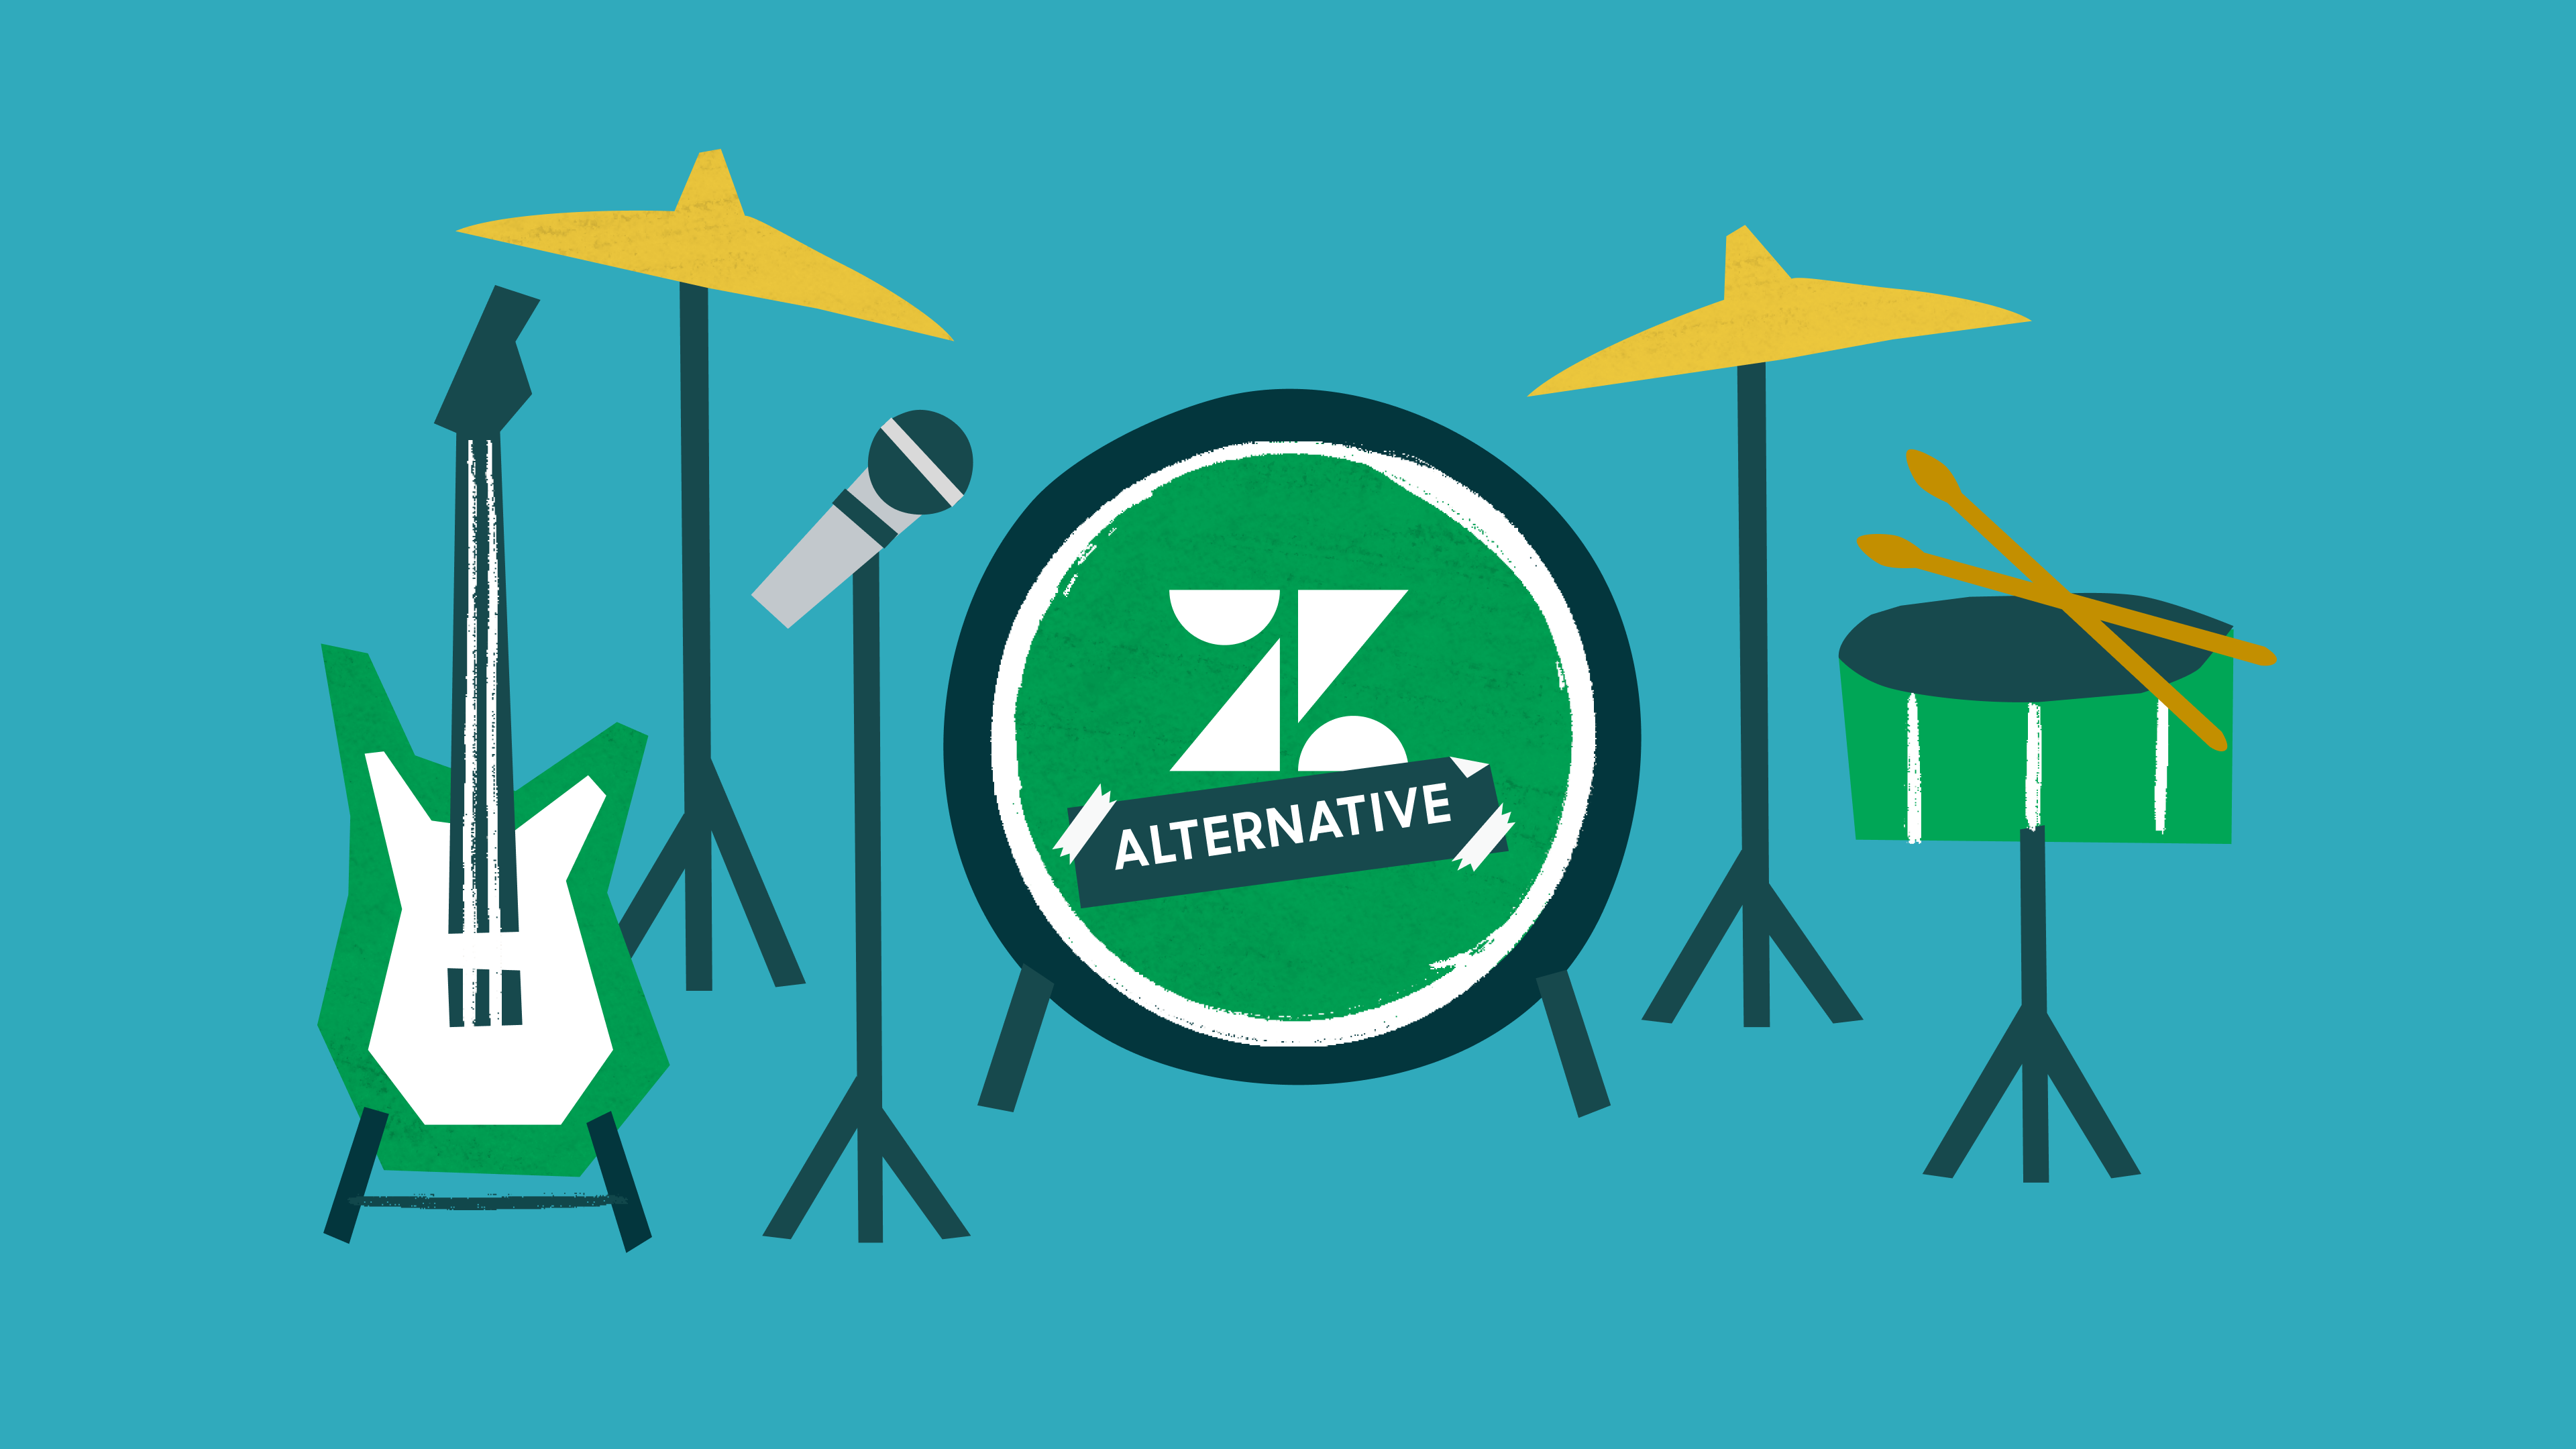 24.-Zendesk-Alternative-Live-Performance-at-holiday-party.-Mikkel-played-the-cowbell